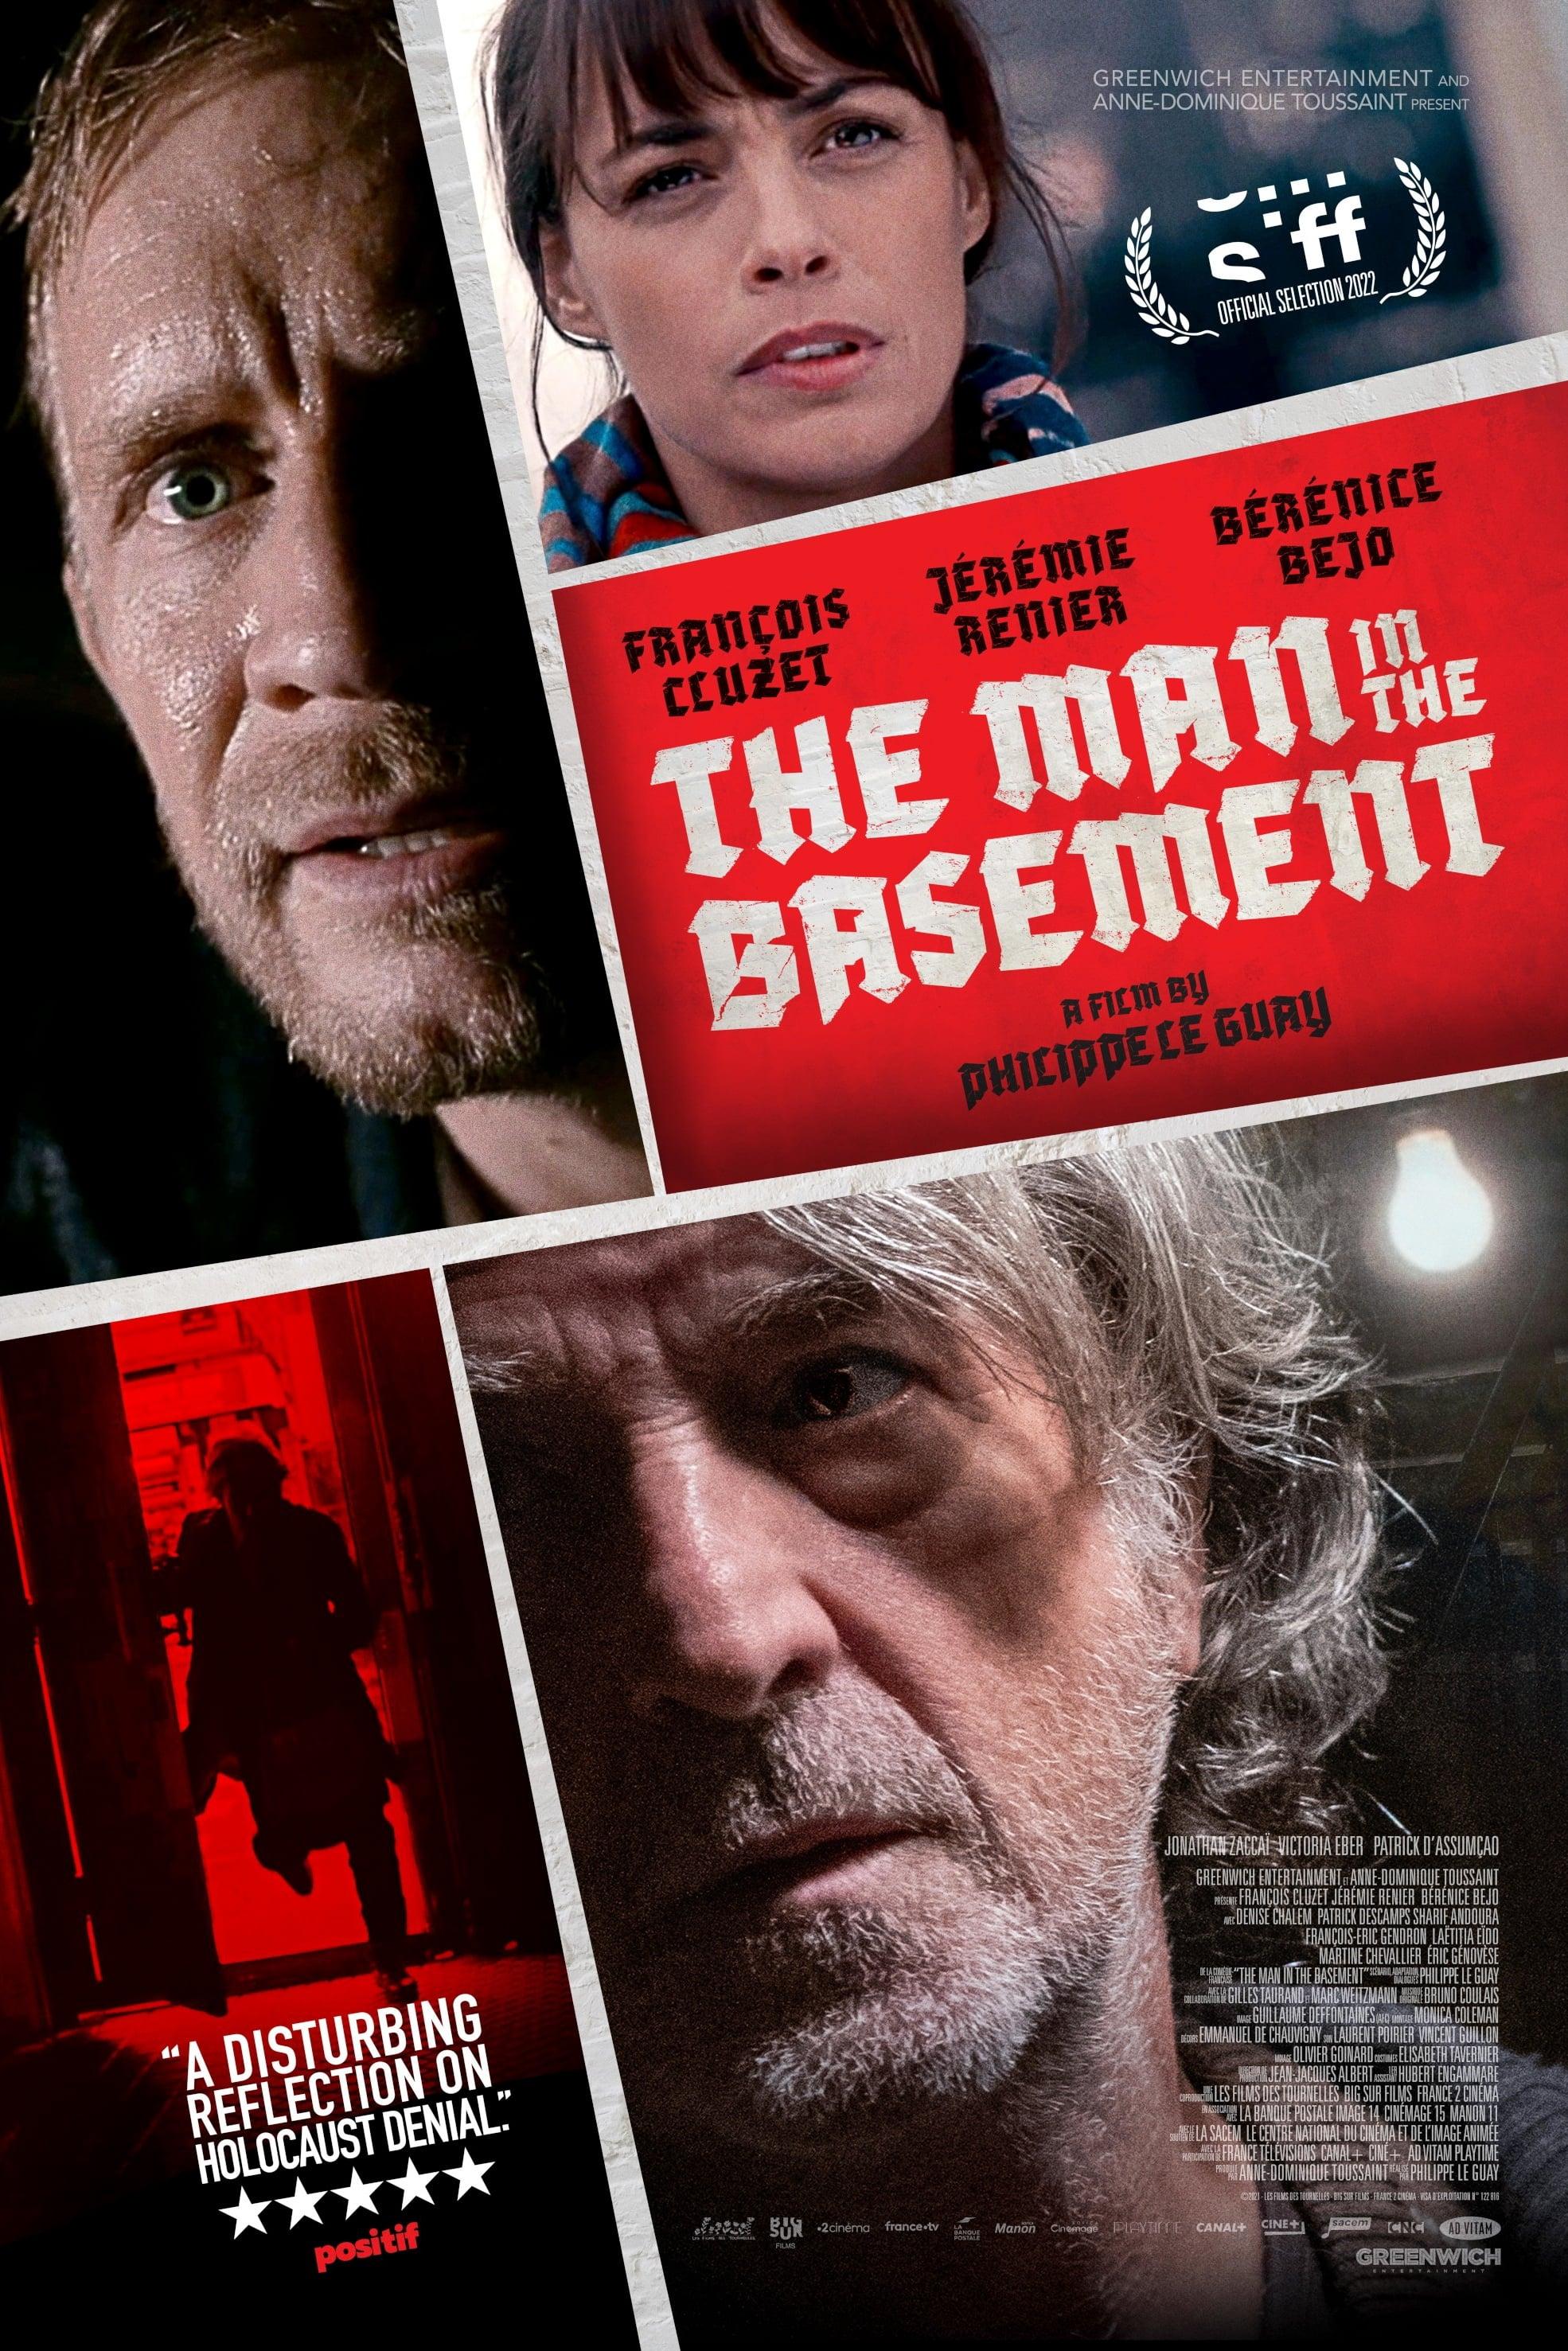 The Man in the Basement poster